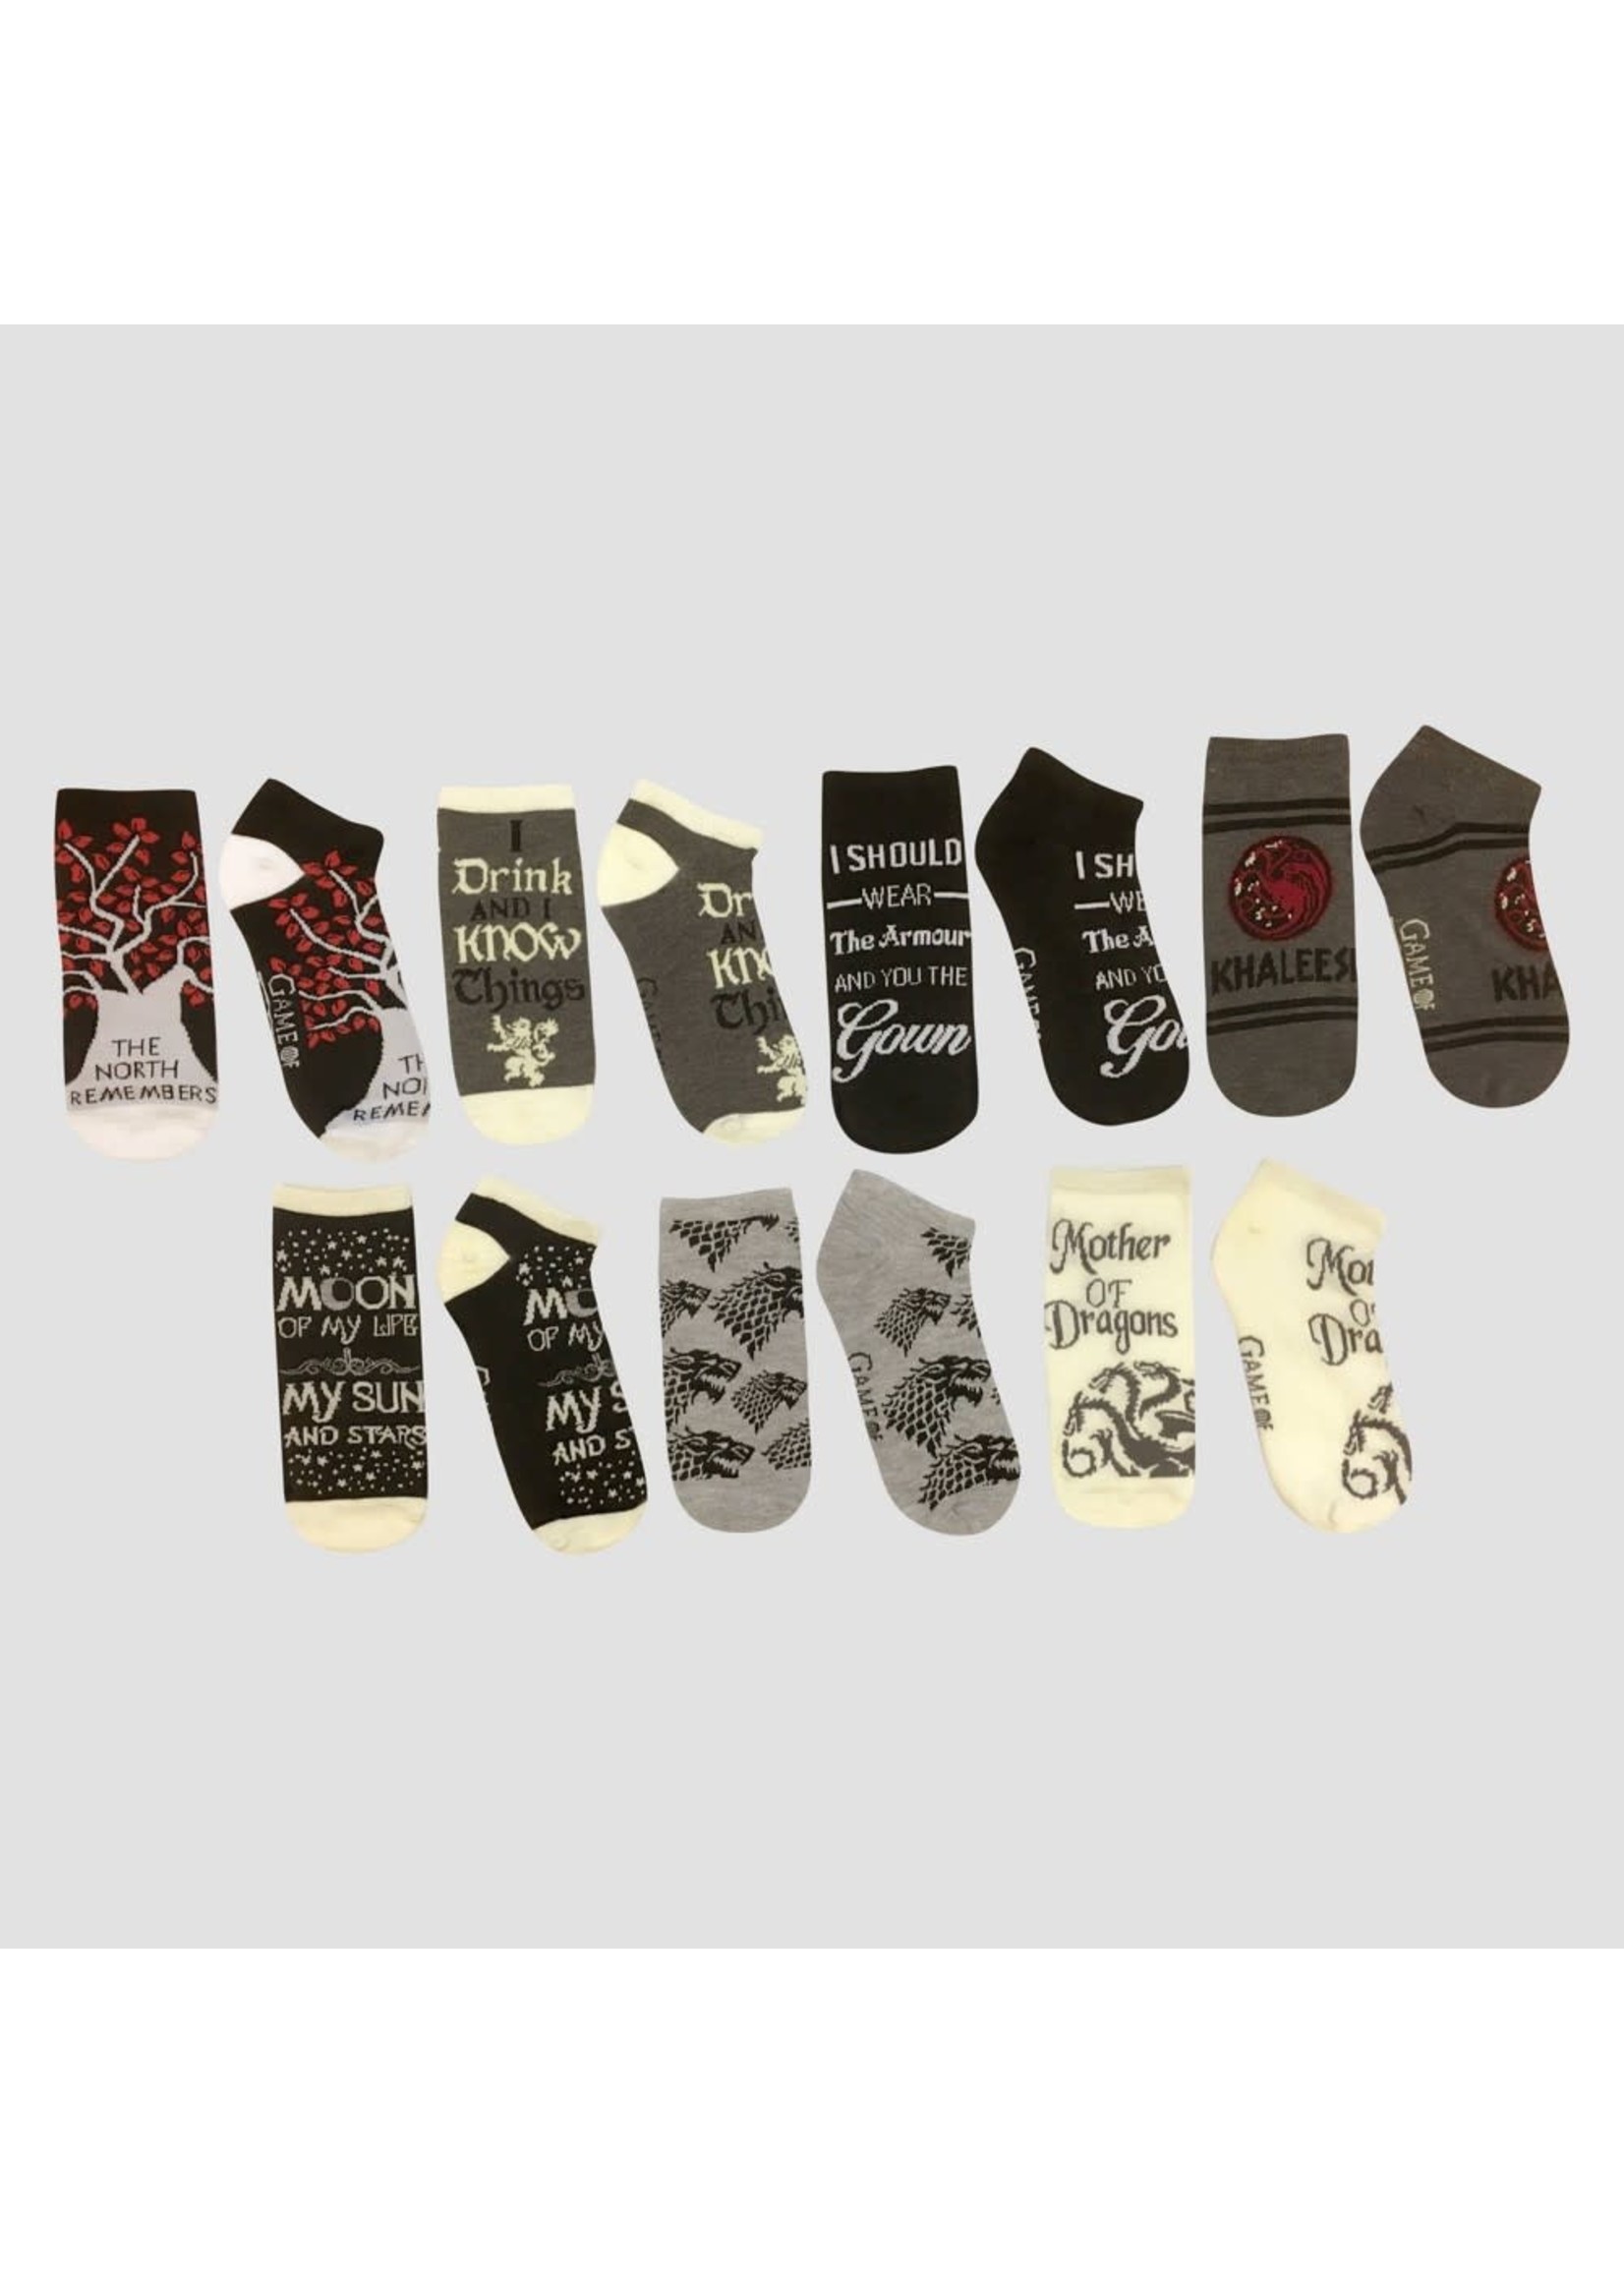 Women's Game of Thrones 7pk A Week of Socks Box - Assorted Colors One Size